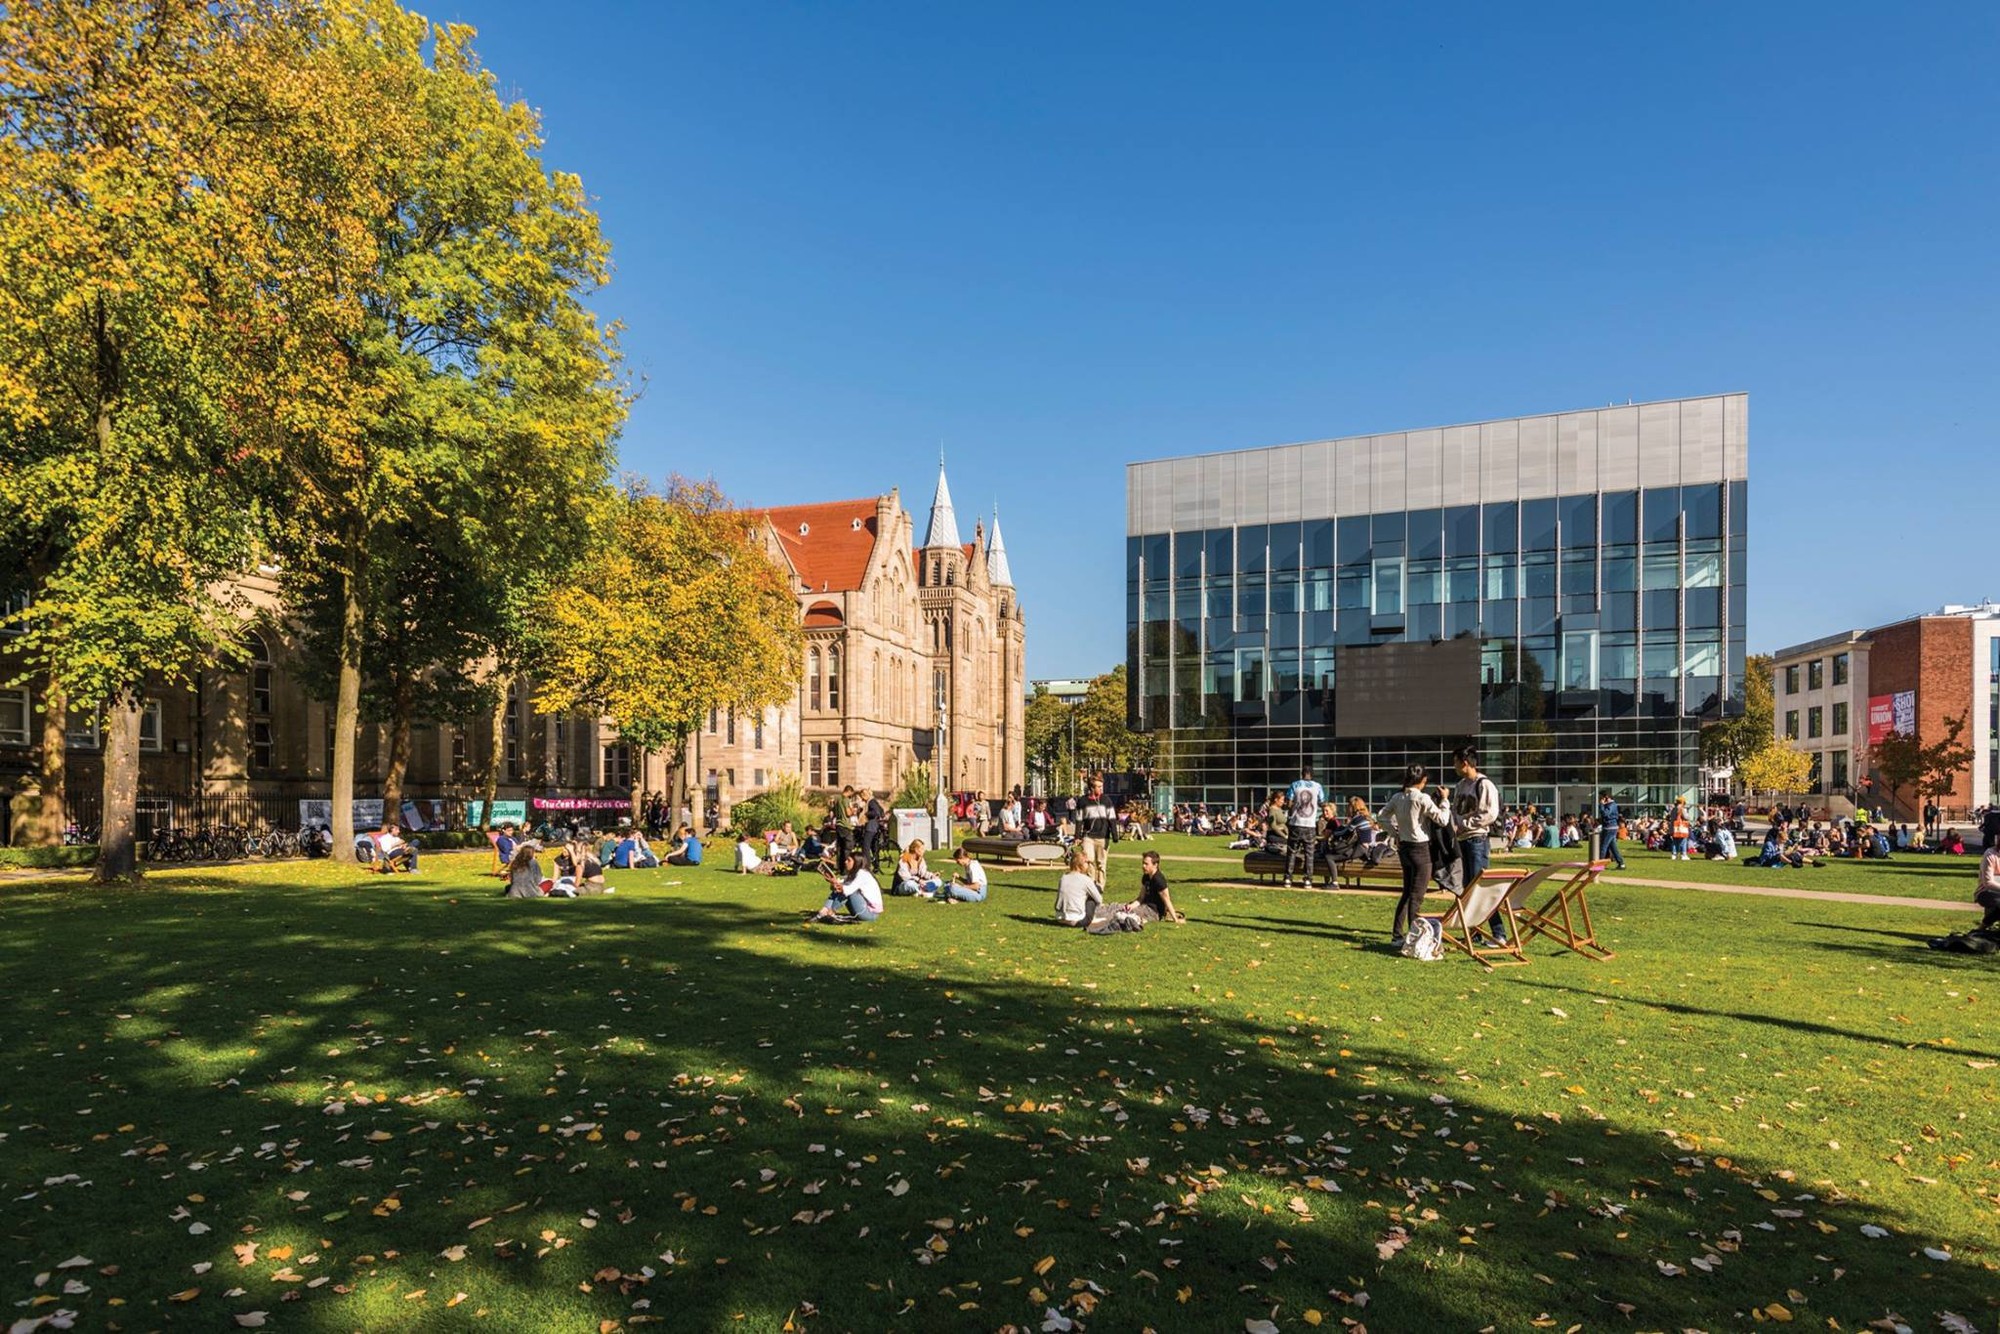 Campus and quad view with students of the University of Manchester